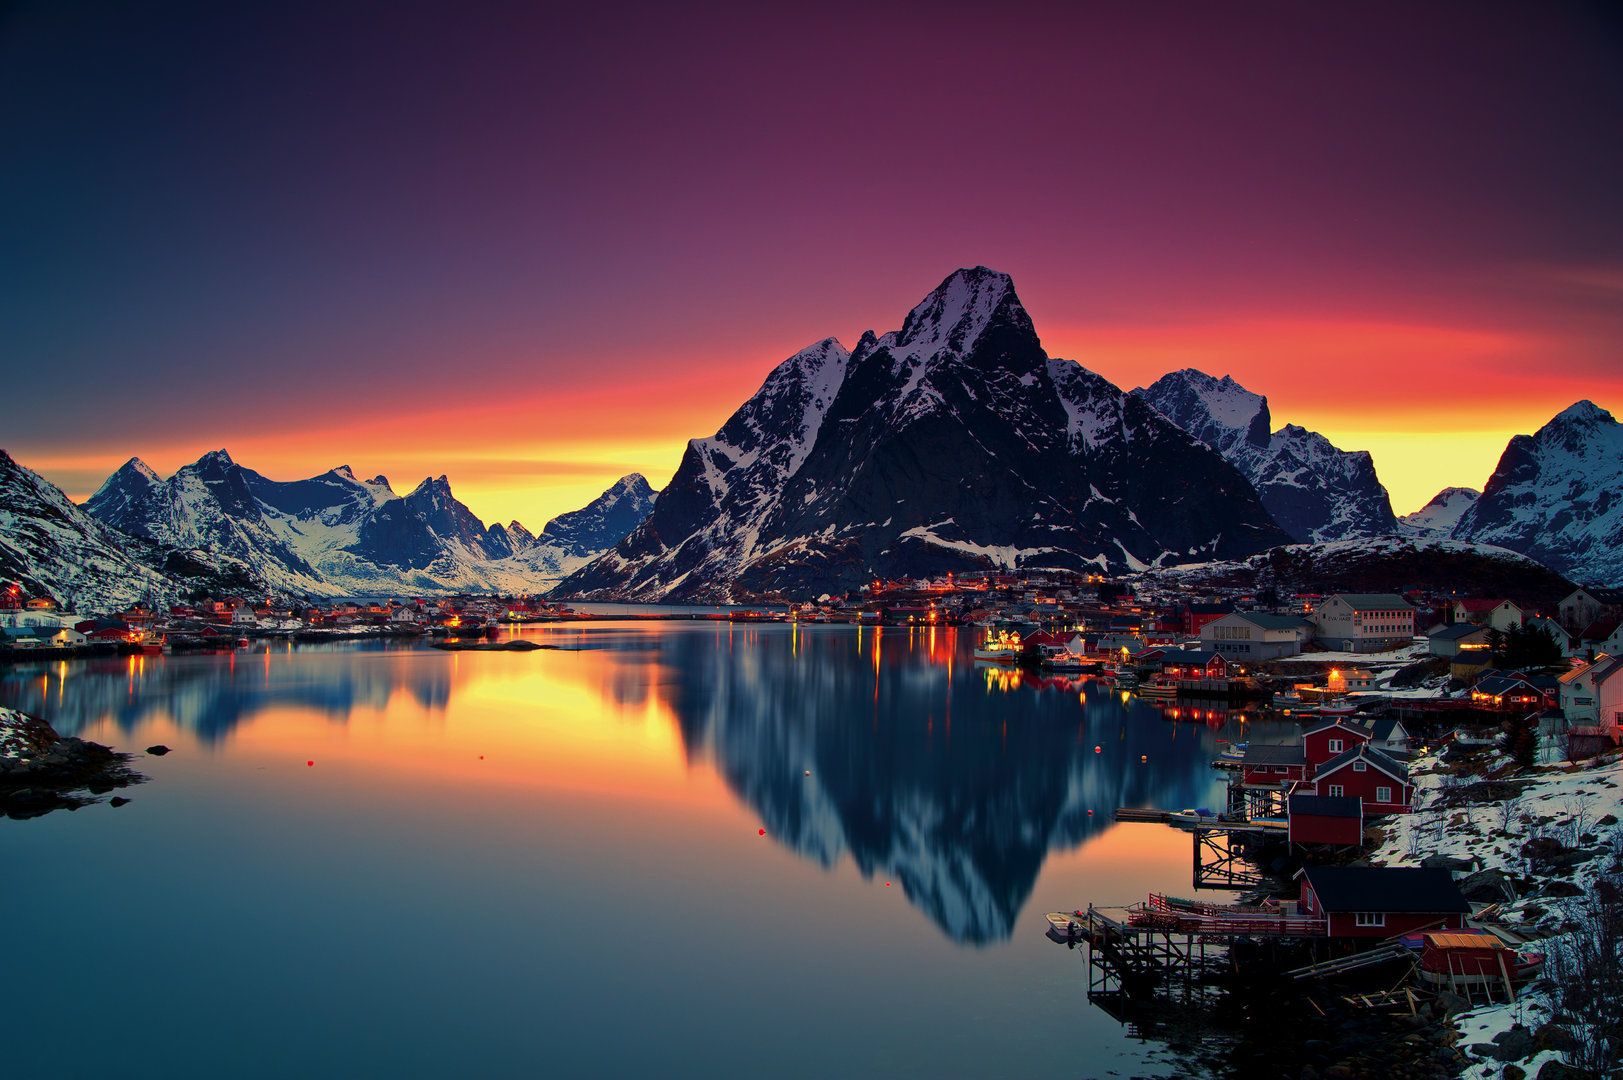 photo that prove Norway is the most beautiful place on earth